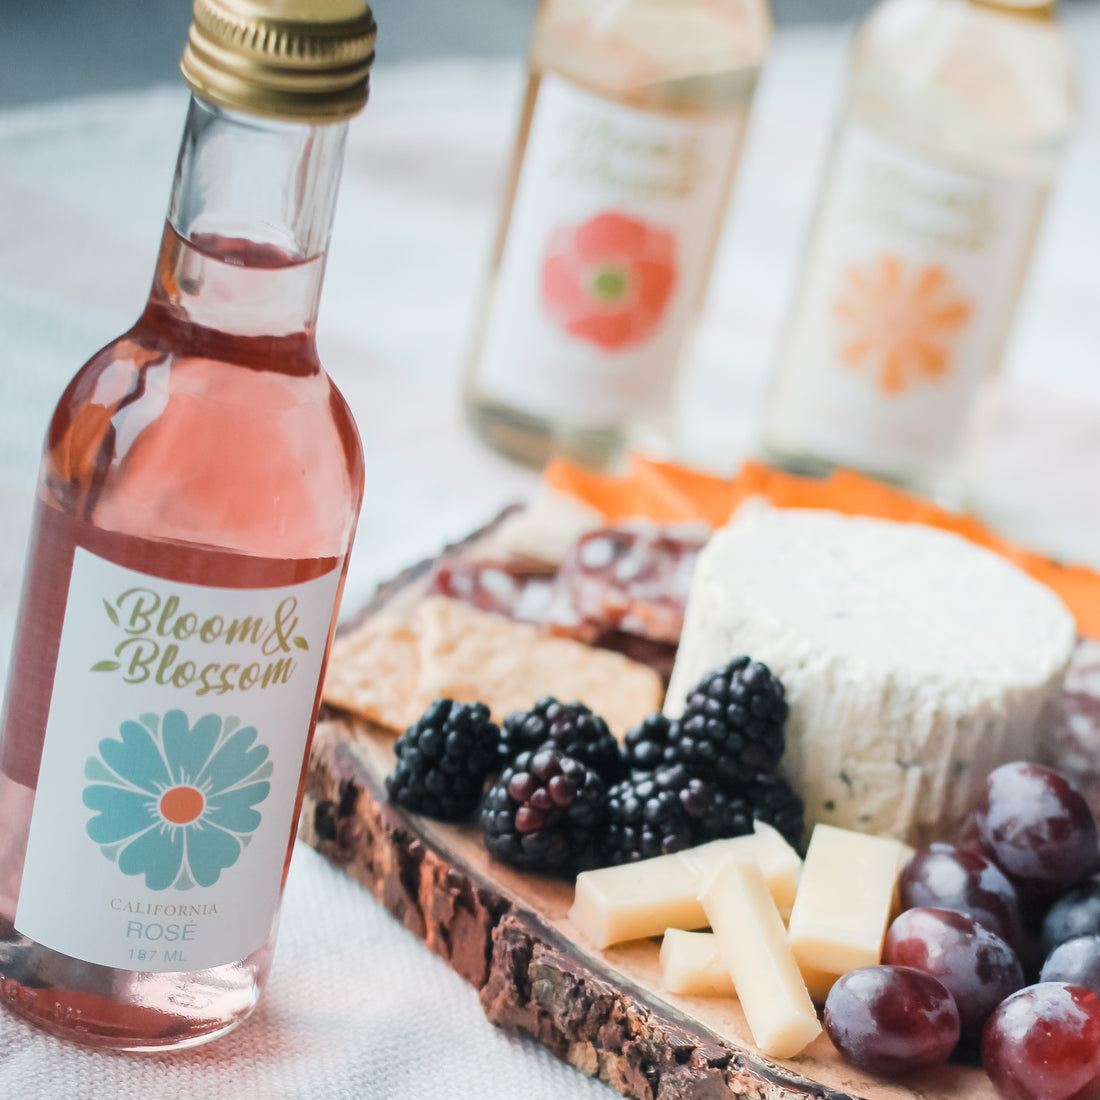 Sip, Gift, Repeat: Mini Wine Bottles - The Perfect Gift for Any Occasion